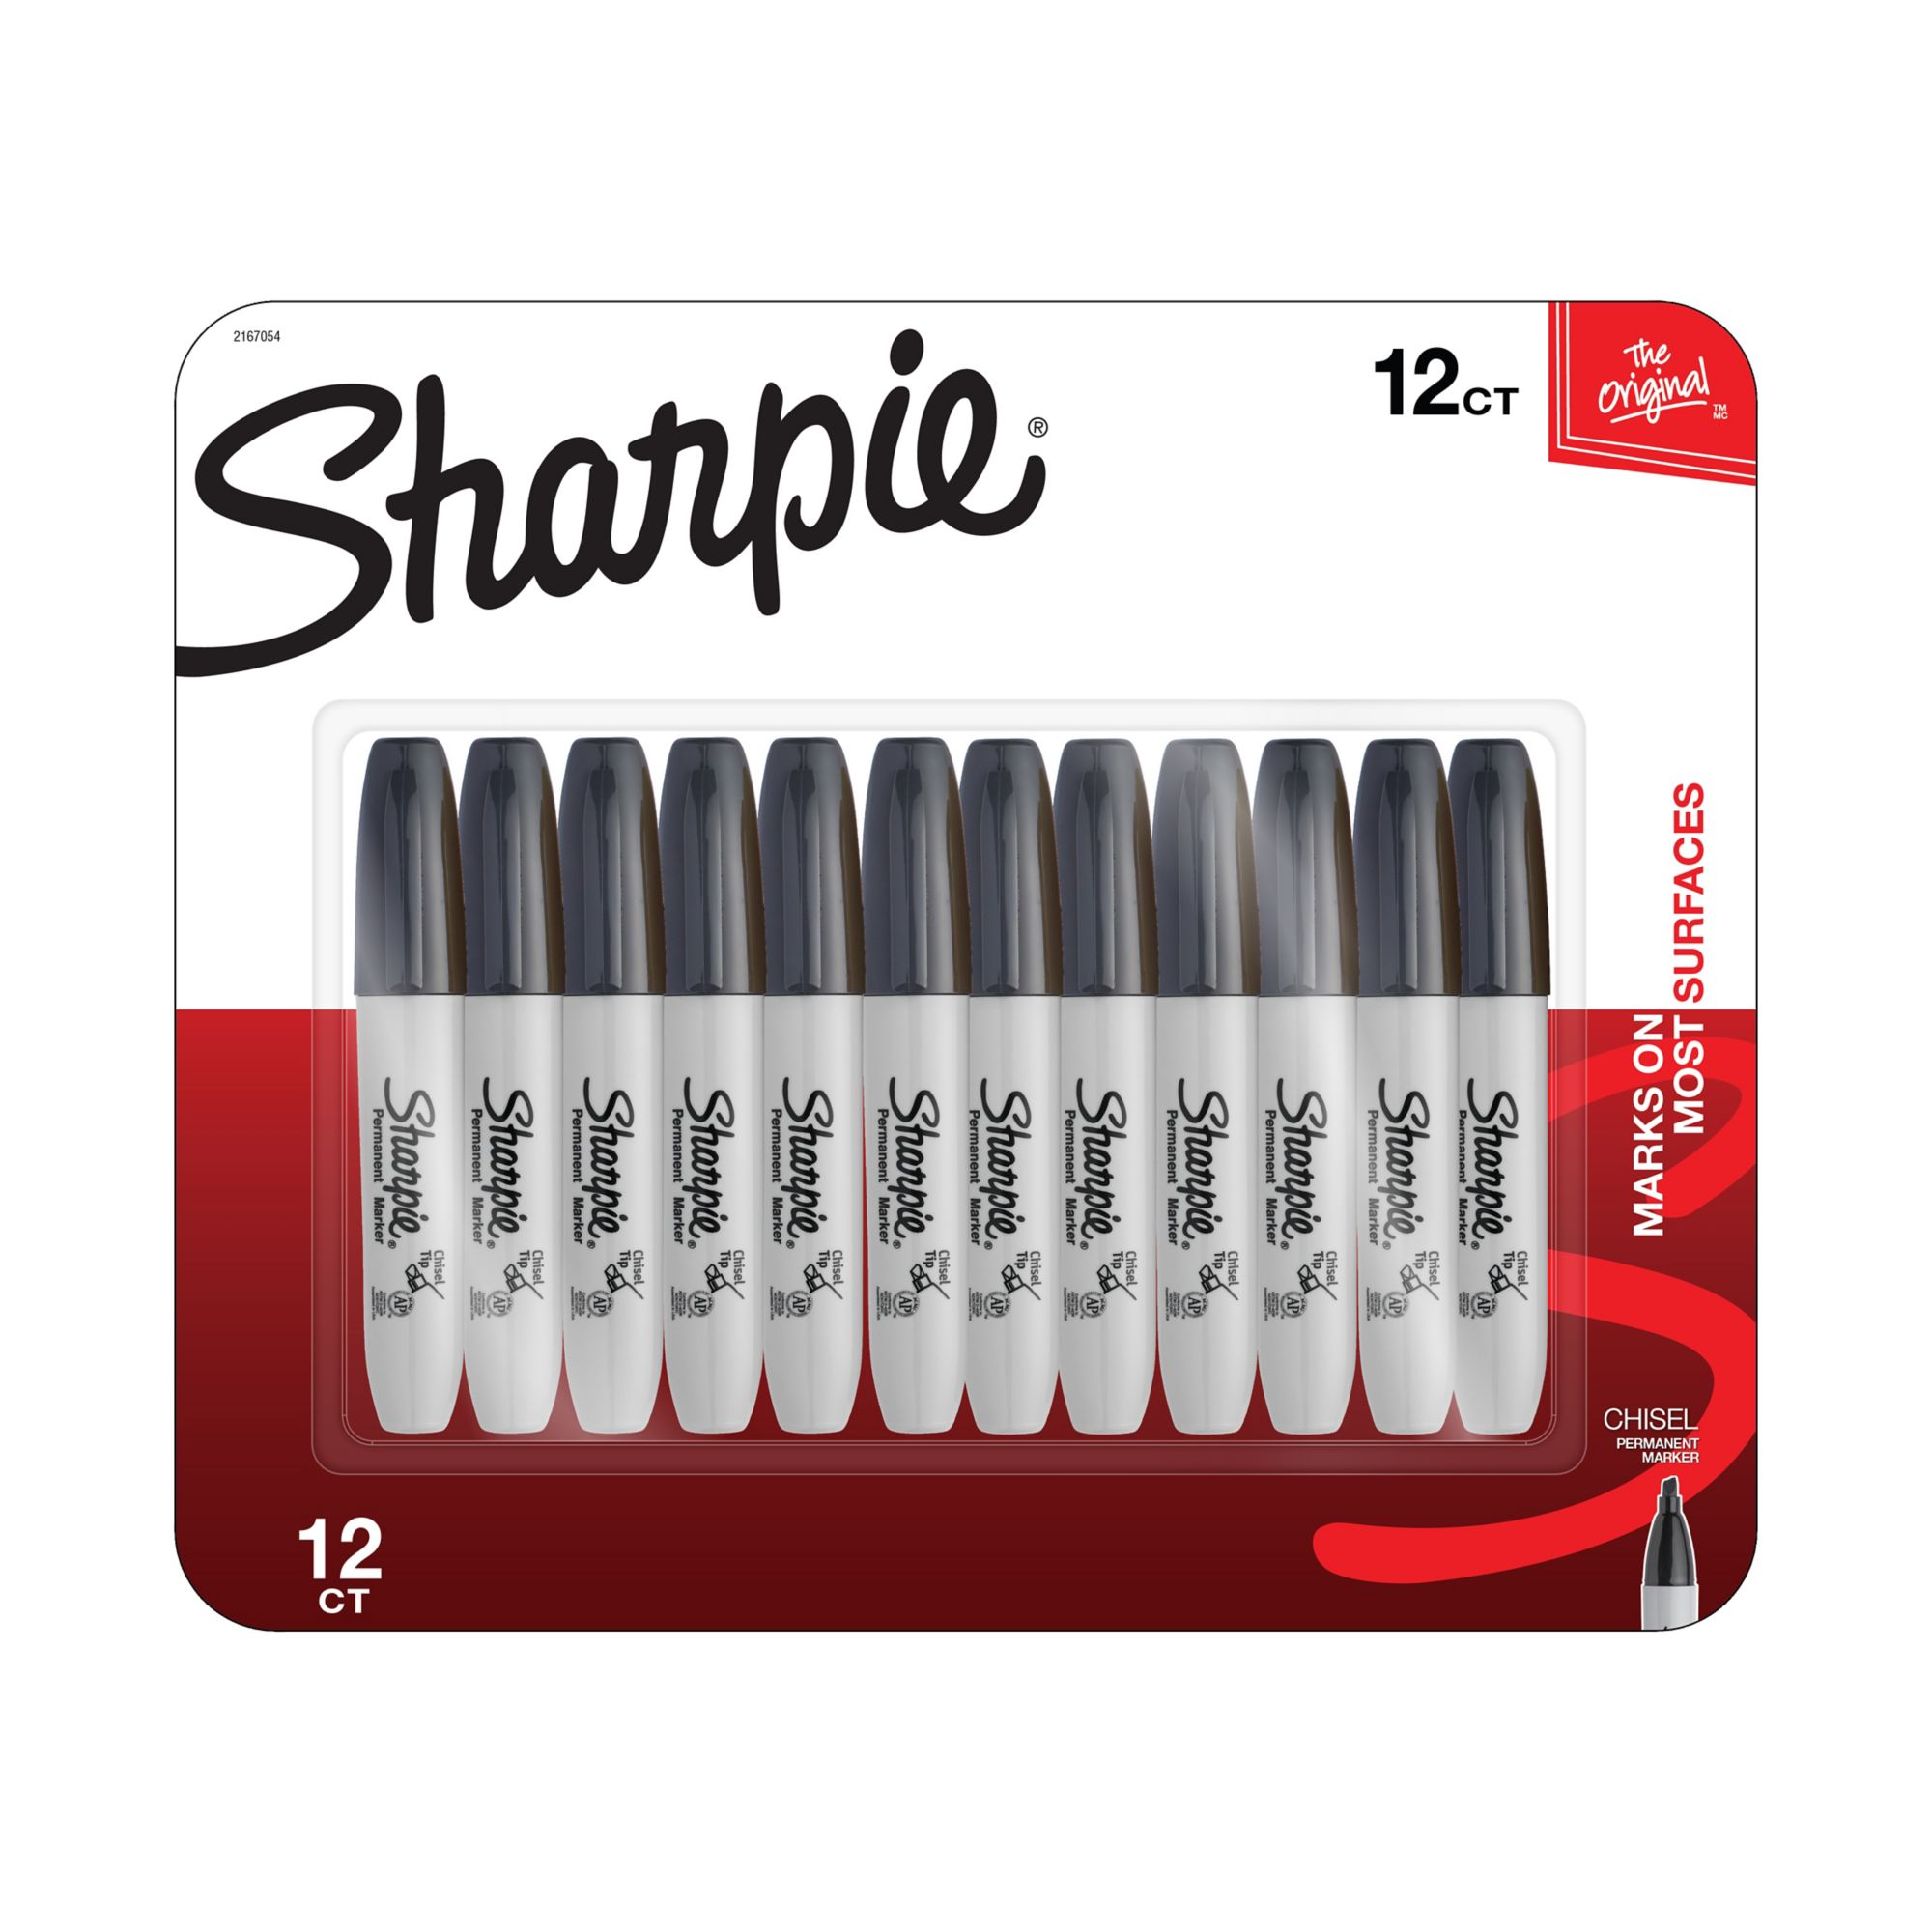 Sharpie – Pens and Junk